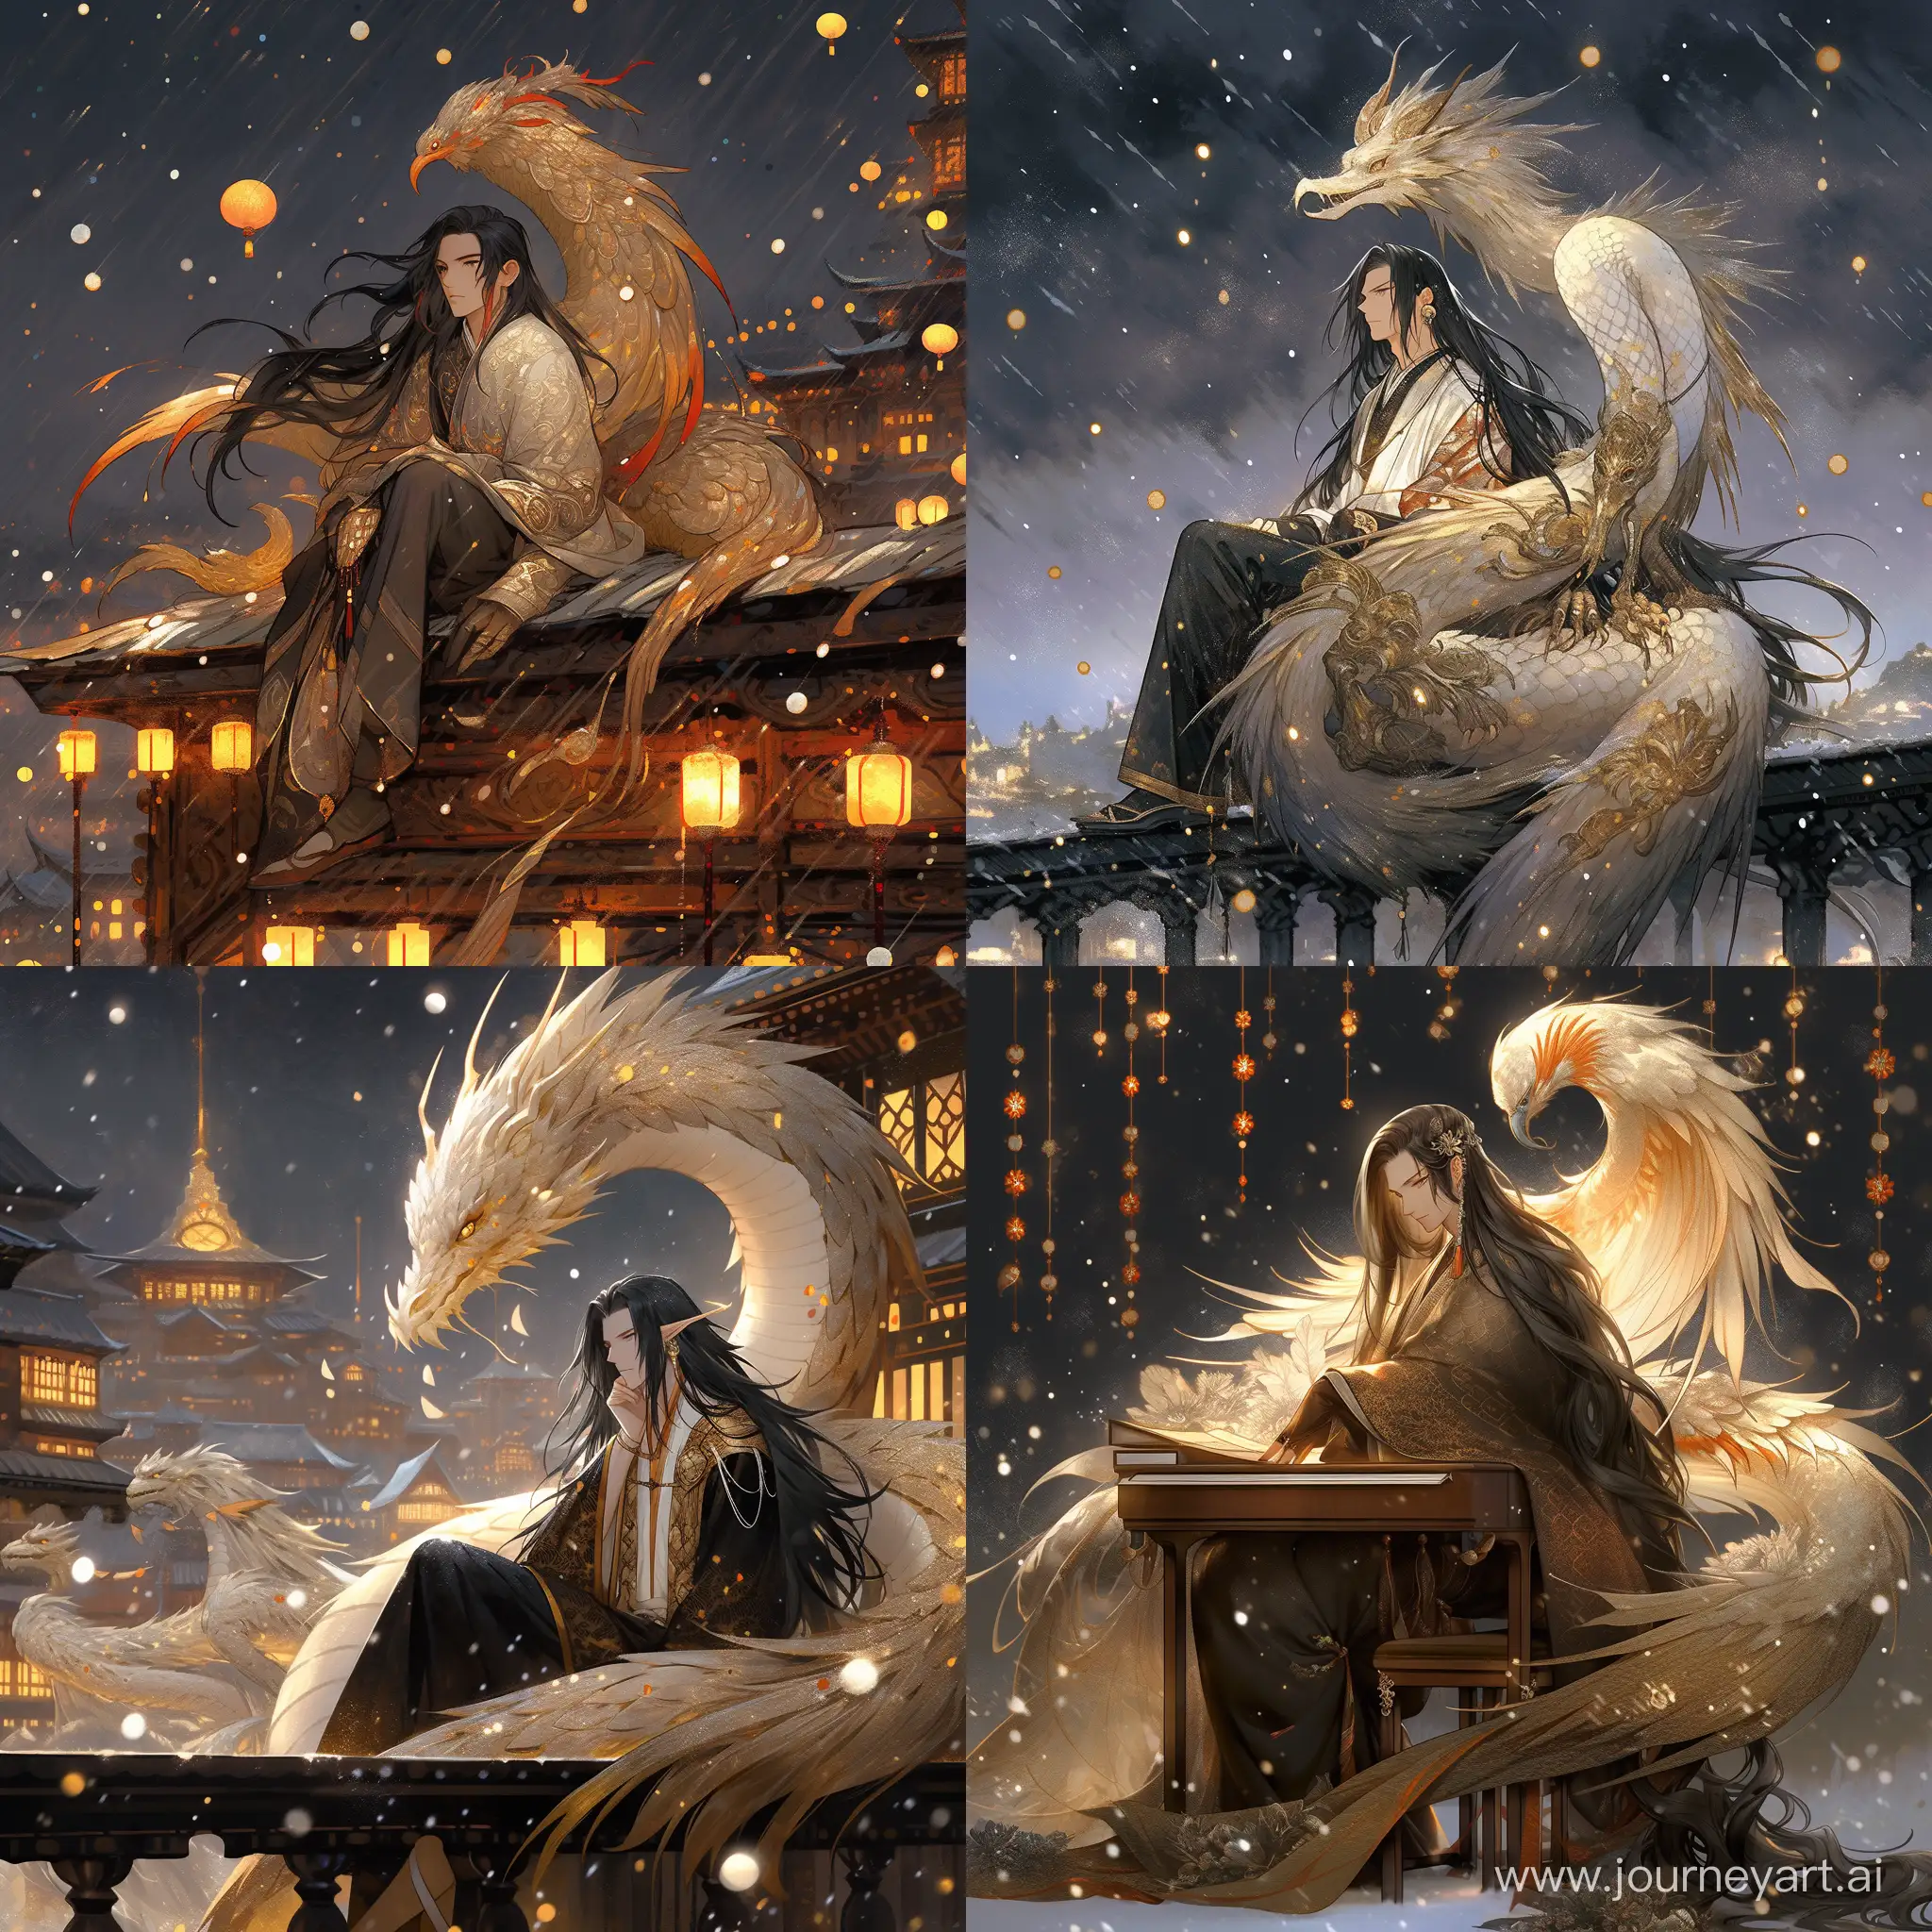 Enchanting-Night-Golden-Hanfuclad-Youth-with-Majestic-Phoenix-in-Snowfall